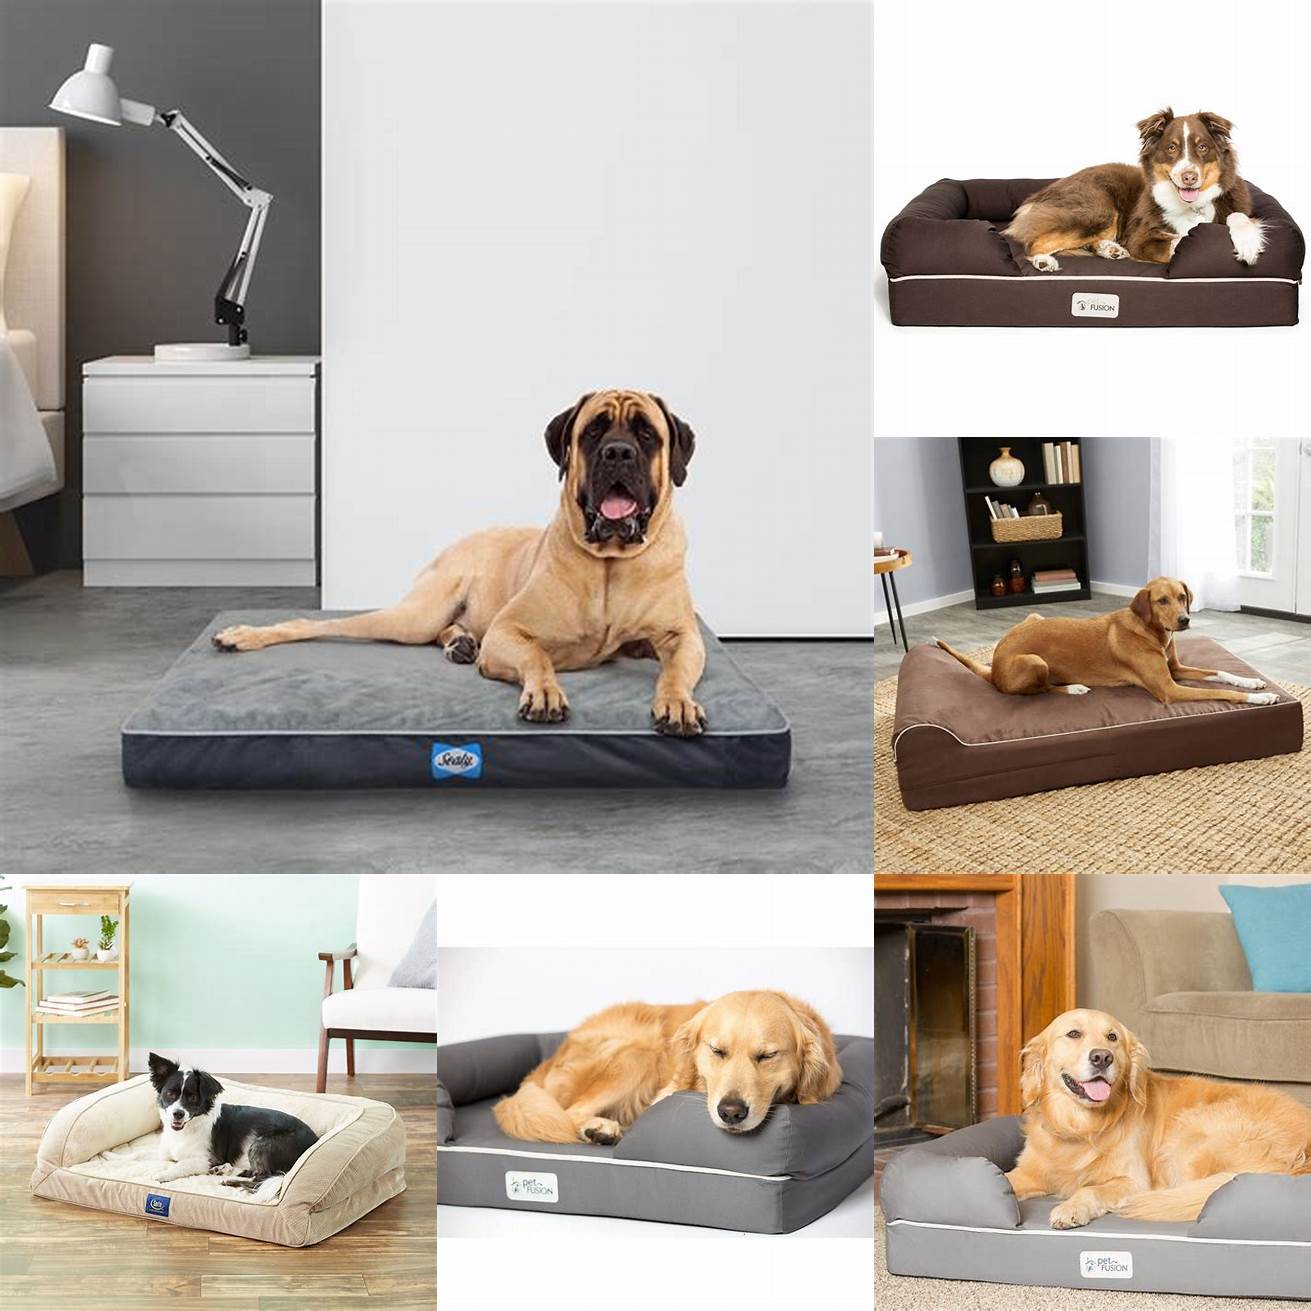 4 Best for Support The PetFusion Orthopedic Dog Bed